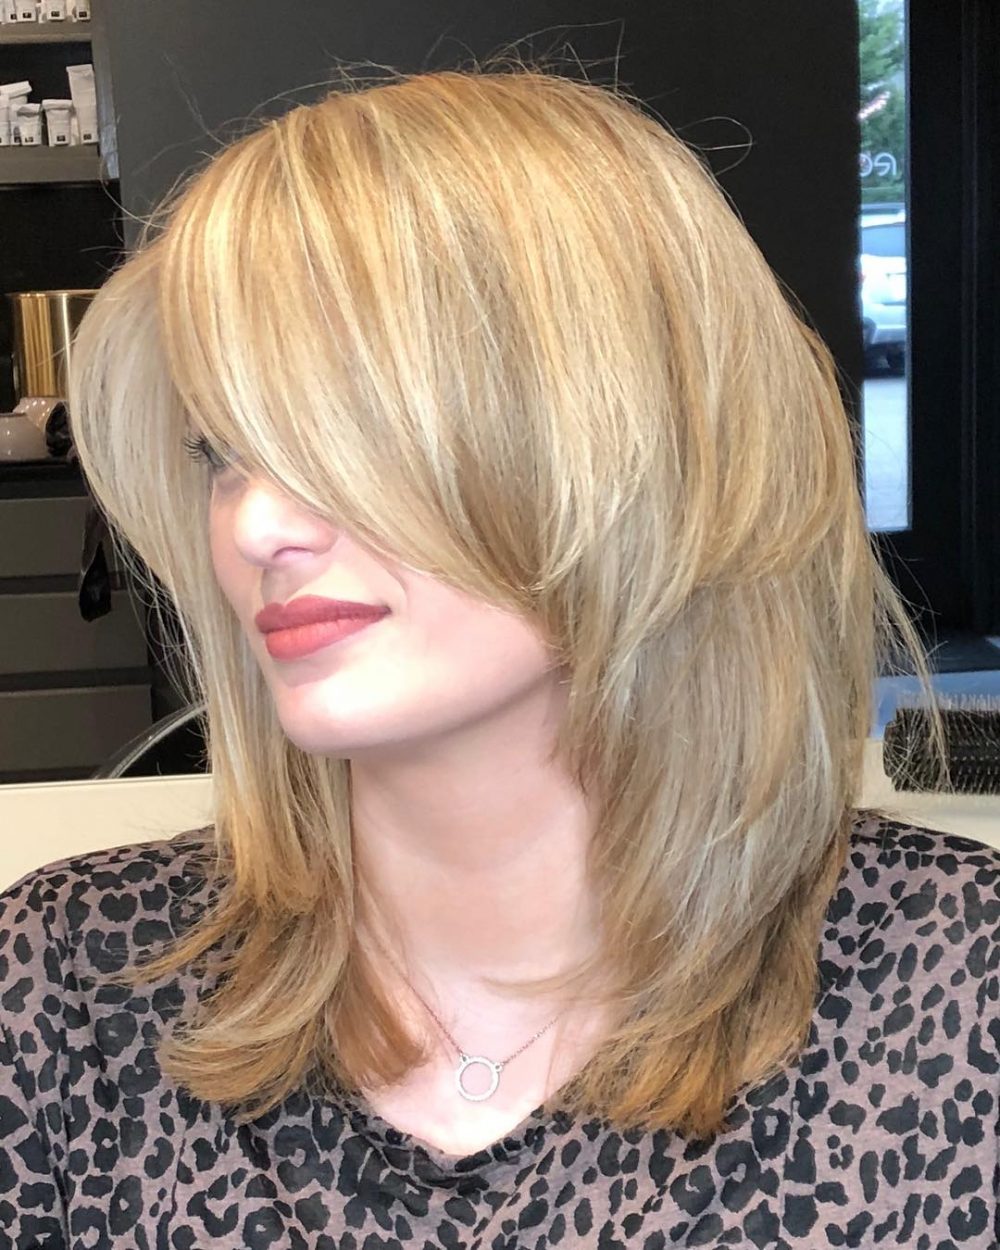 Mid-Length Razor Cut with Long Bangs and Short Layers